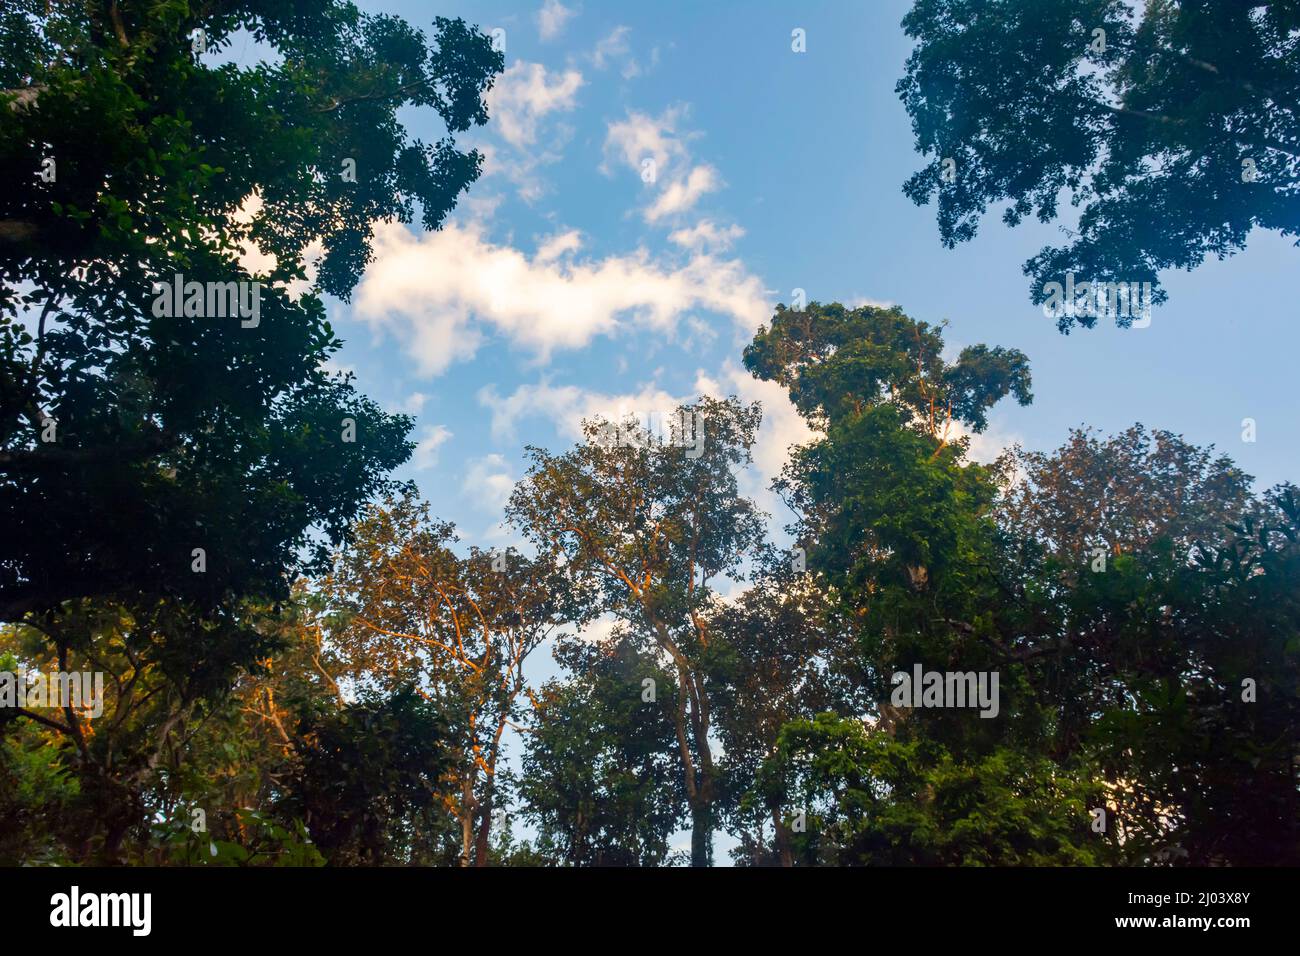 Top view of Canopy in the Forestearly morning with clouds in the sky Landscape Stock Photo